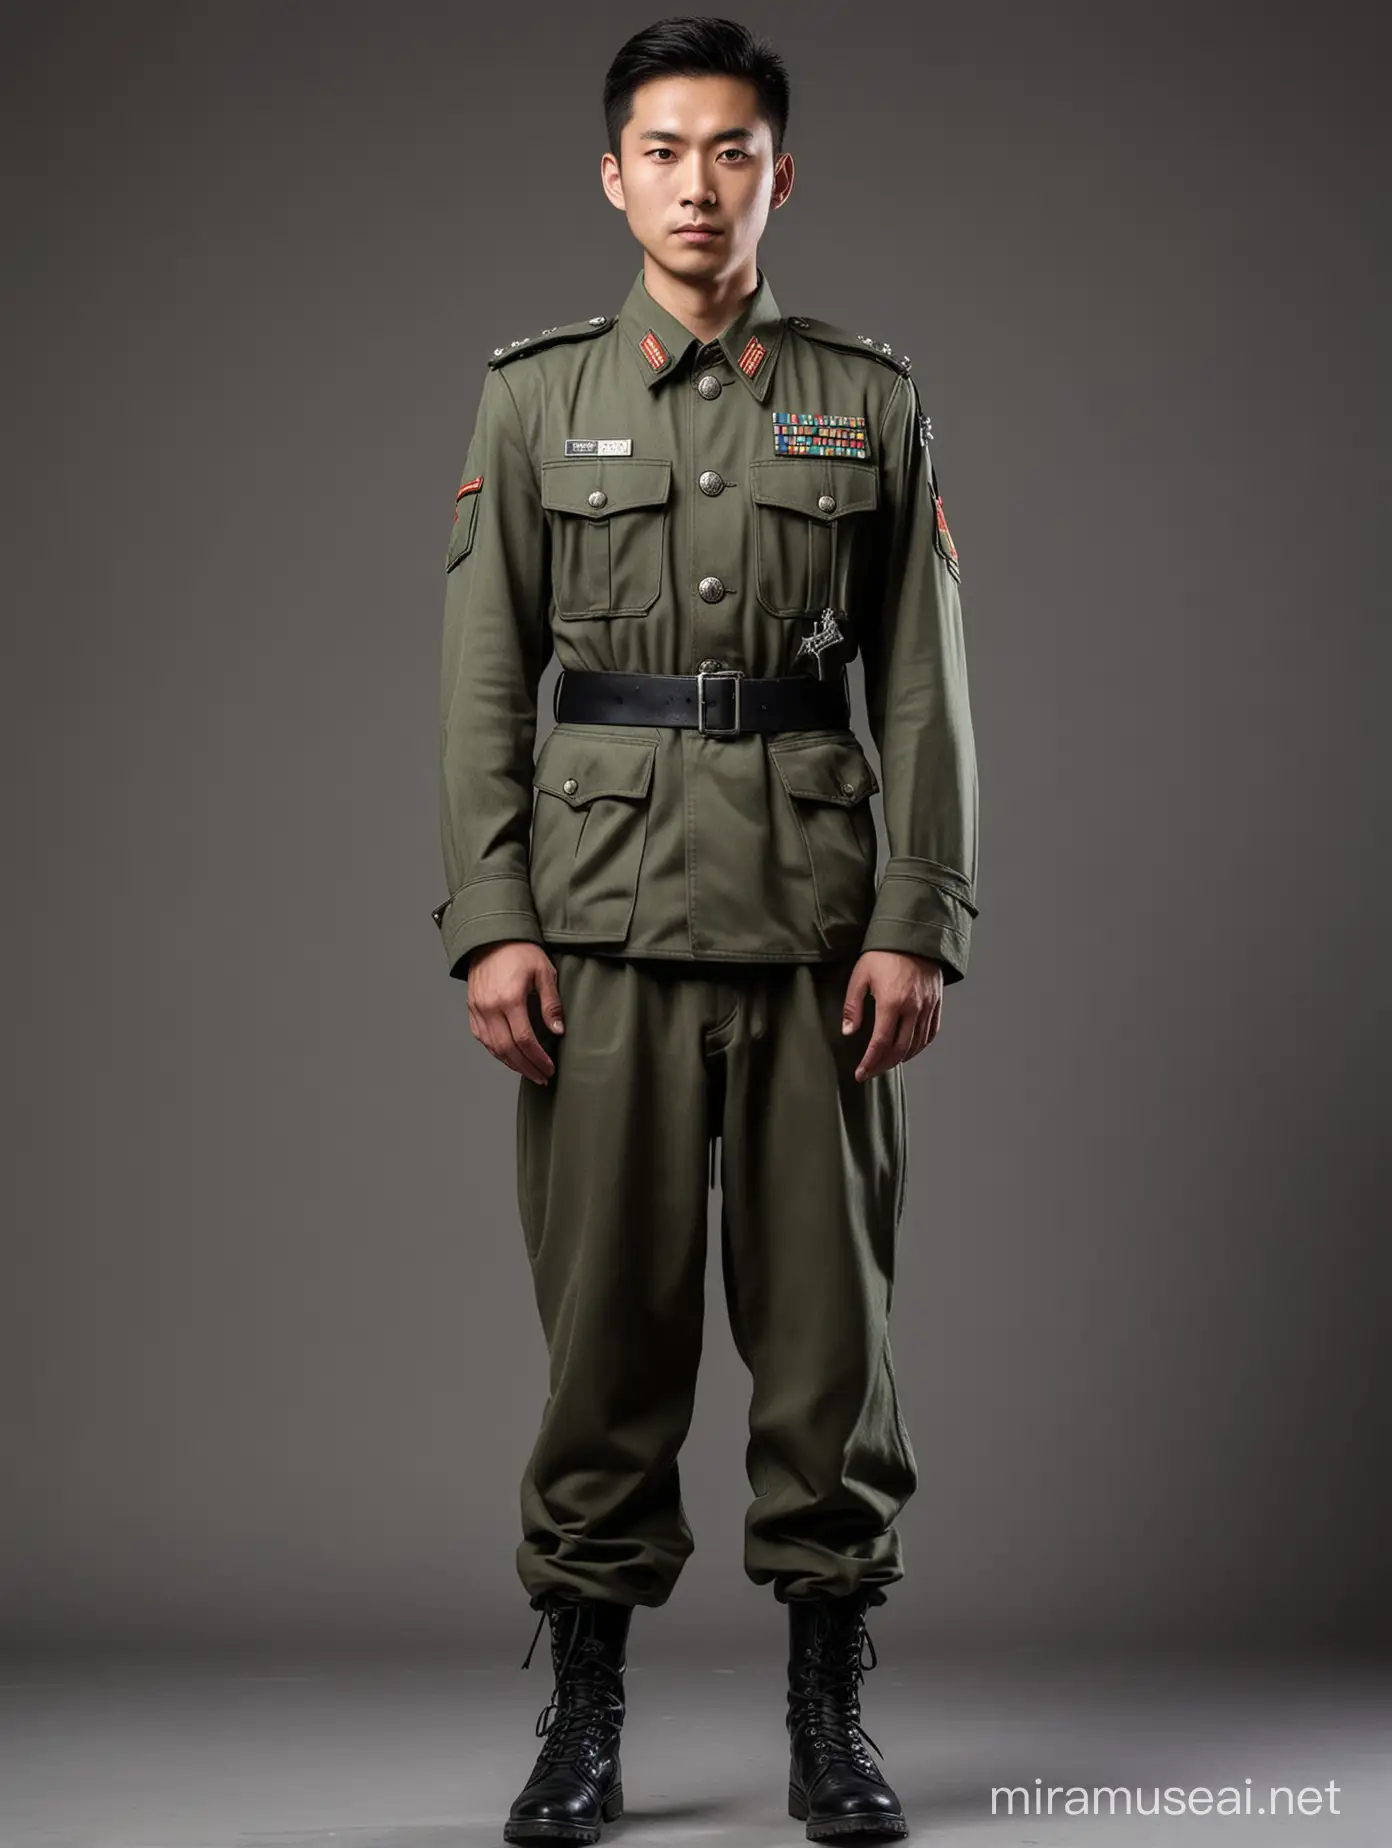 Youthful Chinese Soldier Standing Tall in Formal Uniform